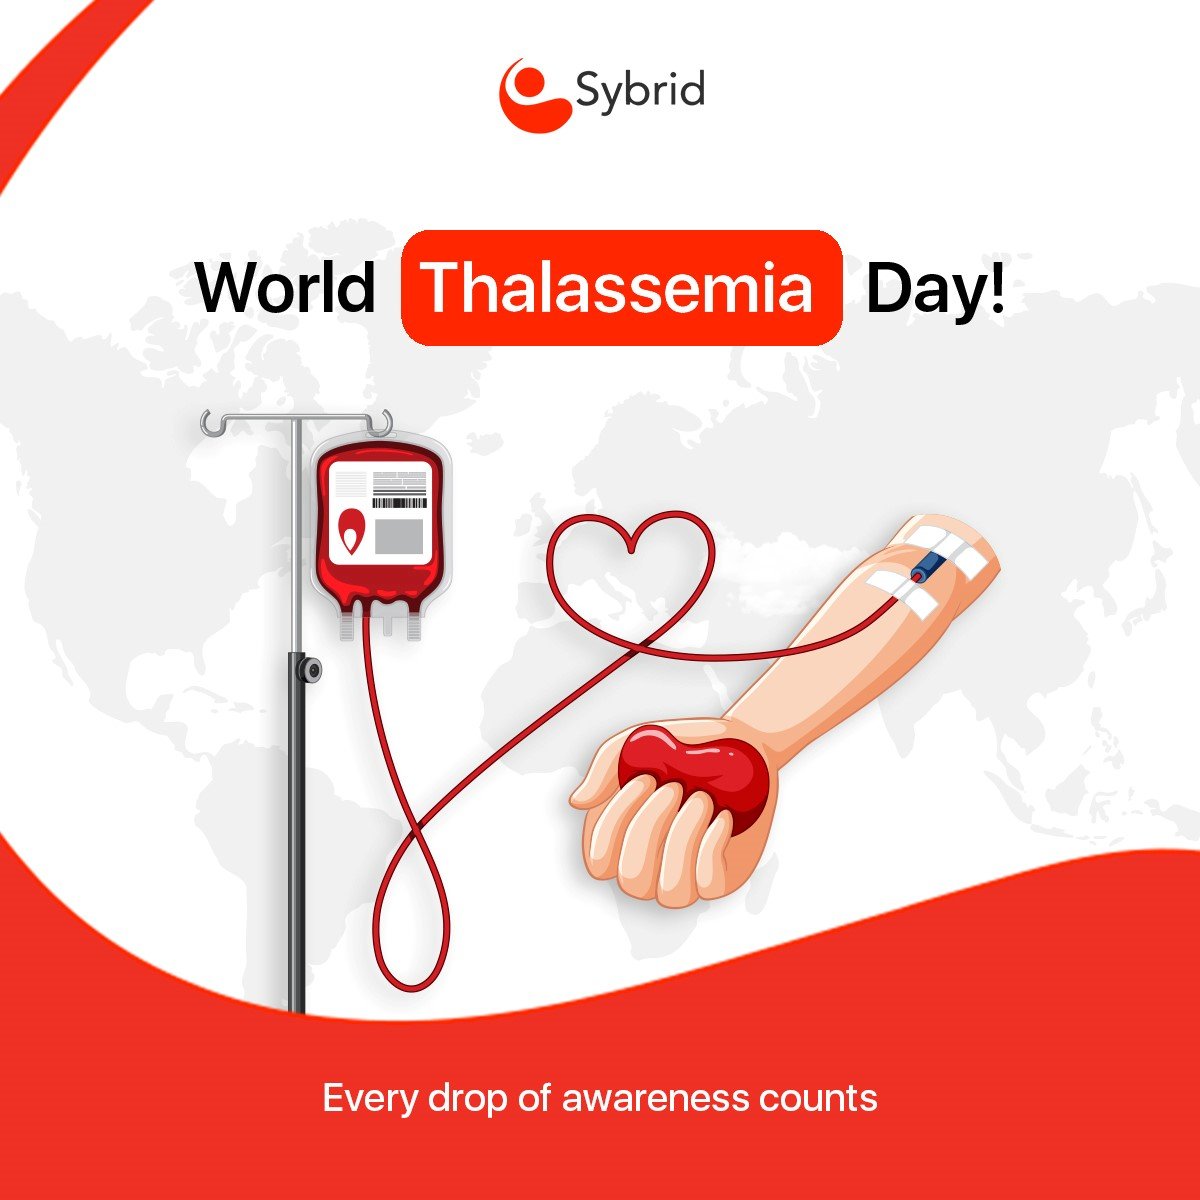 On #WorldThalassemiaDay, #Sybrid intends to raise awareness and show solidarity with individuals impacted by #thalassemia. 

Let's promote and educate for a better future. ❤️

#FightThalassemia #BloodDonation #ThalassemiaAwareness #SybridImpact #SybridPakistan